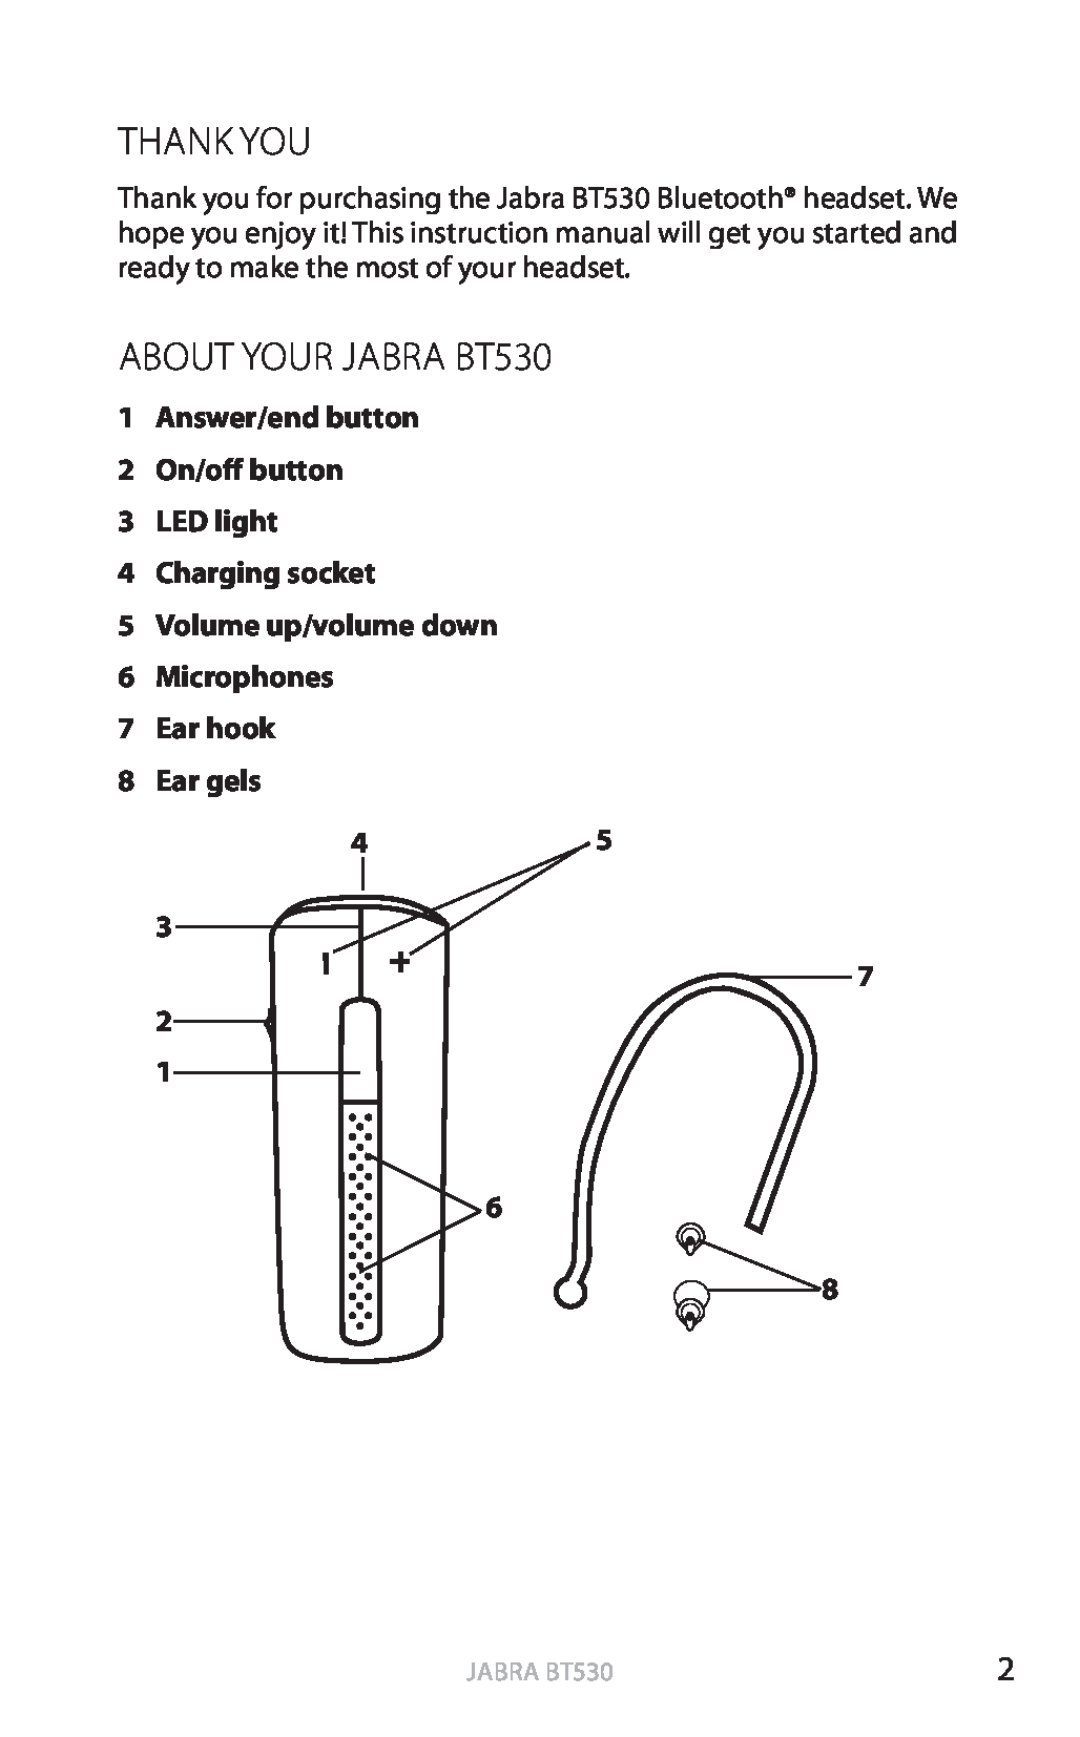 Jabra user manual english, Thank you, About your Jabra BT530, 1Answer/end button 2On/off button 3LED light, Jabra bt530 